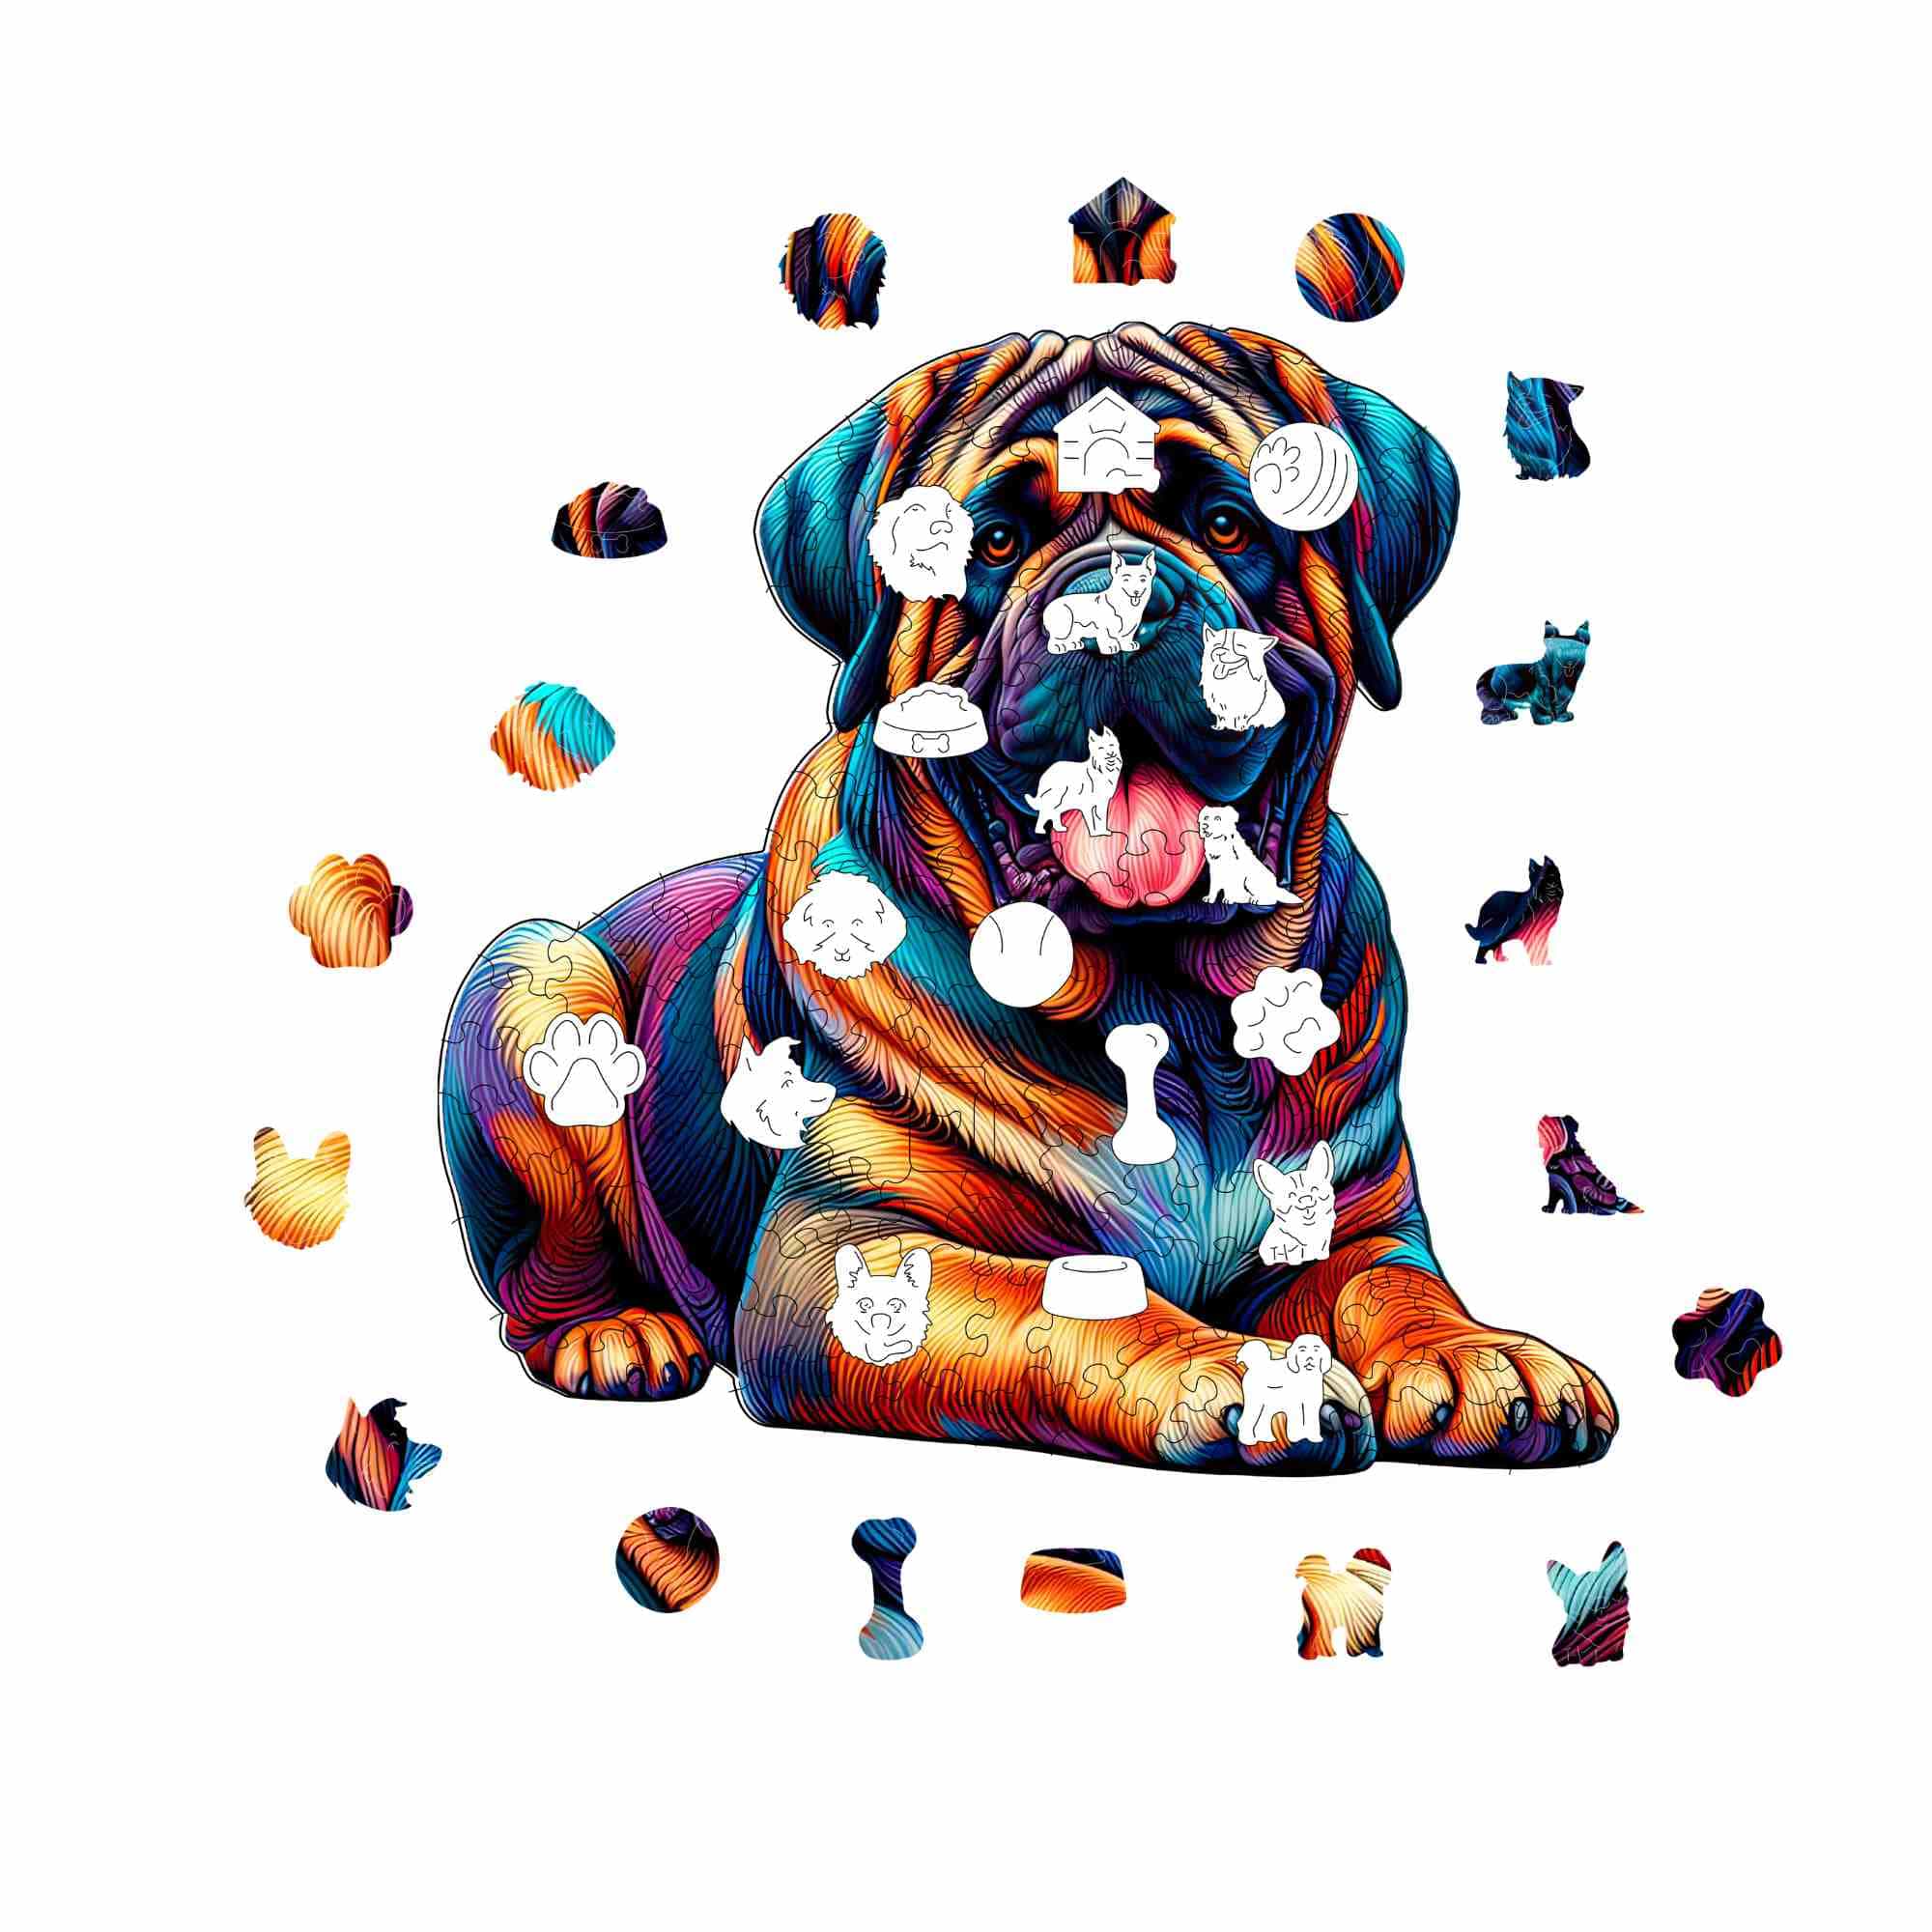 Animal Jigsaw Puzzle > Wooden Jigsaw Puzzle > Jigsaw Puzzle English Mastiff Dog - Jigsaw Puzzle